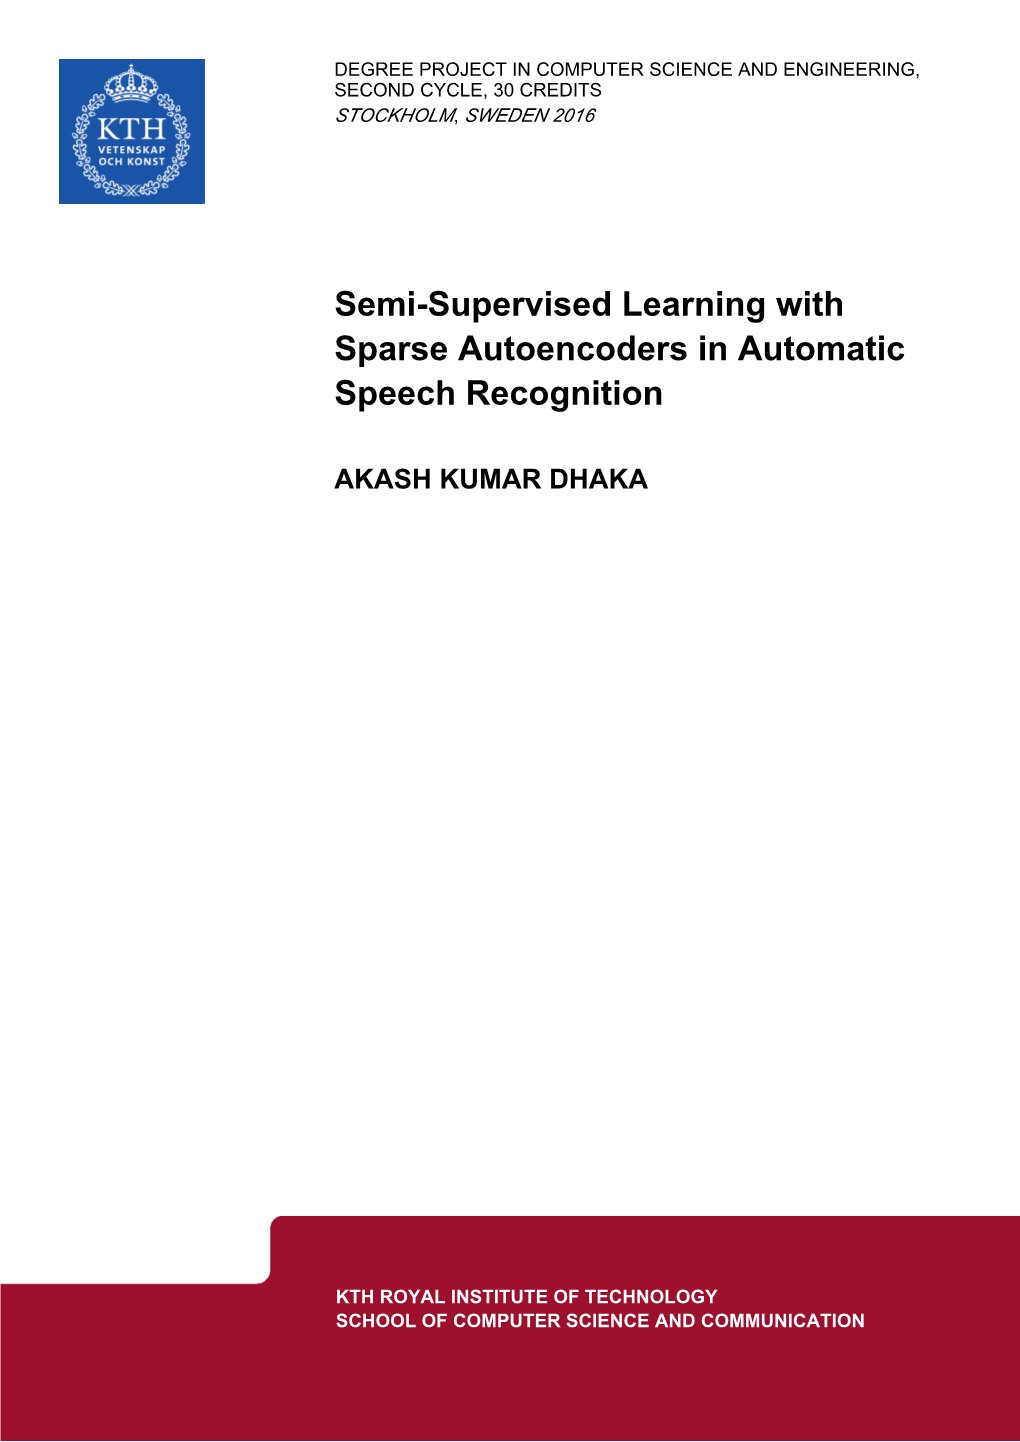 Semi-Supervised Learning with Sparse Autoencoders in Automatic Speech Recognition